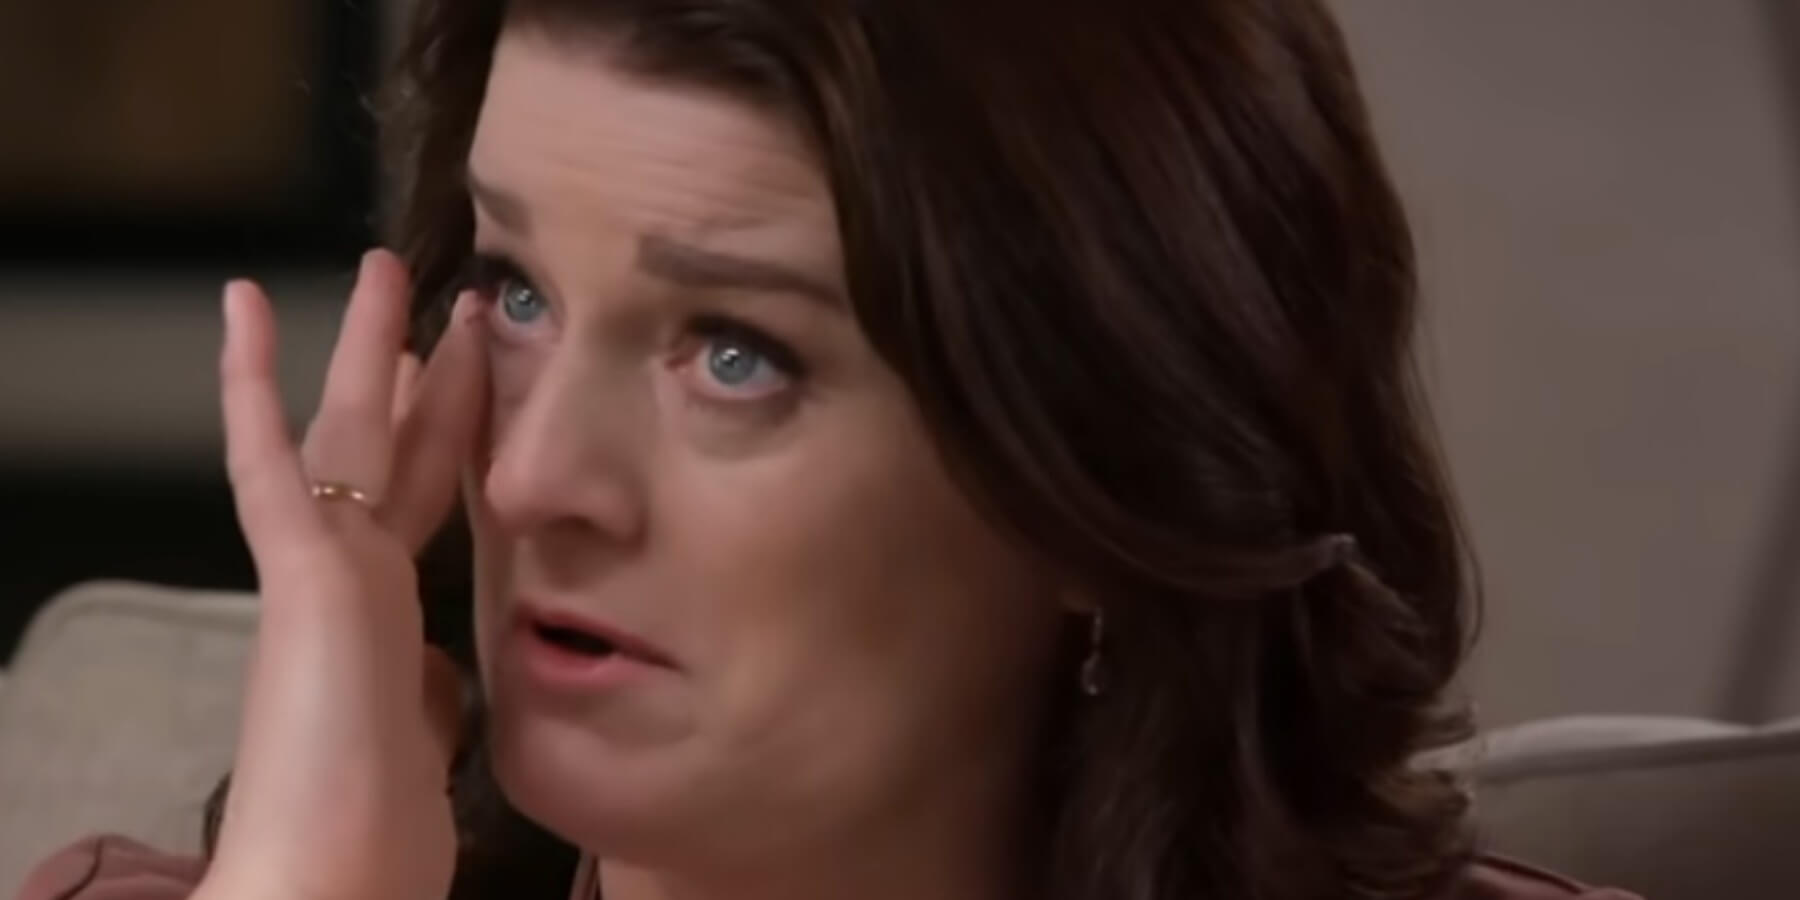 Robyn Brown crying during part 3 of the 'Sister Wives' One on One episodes.